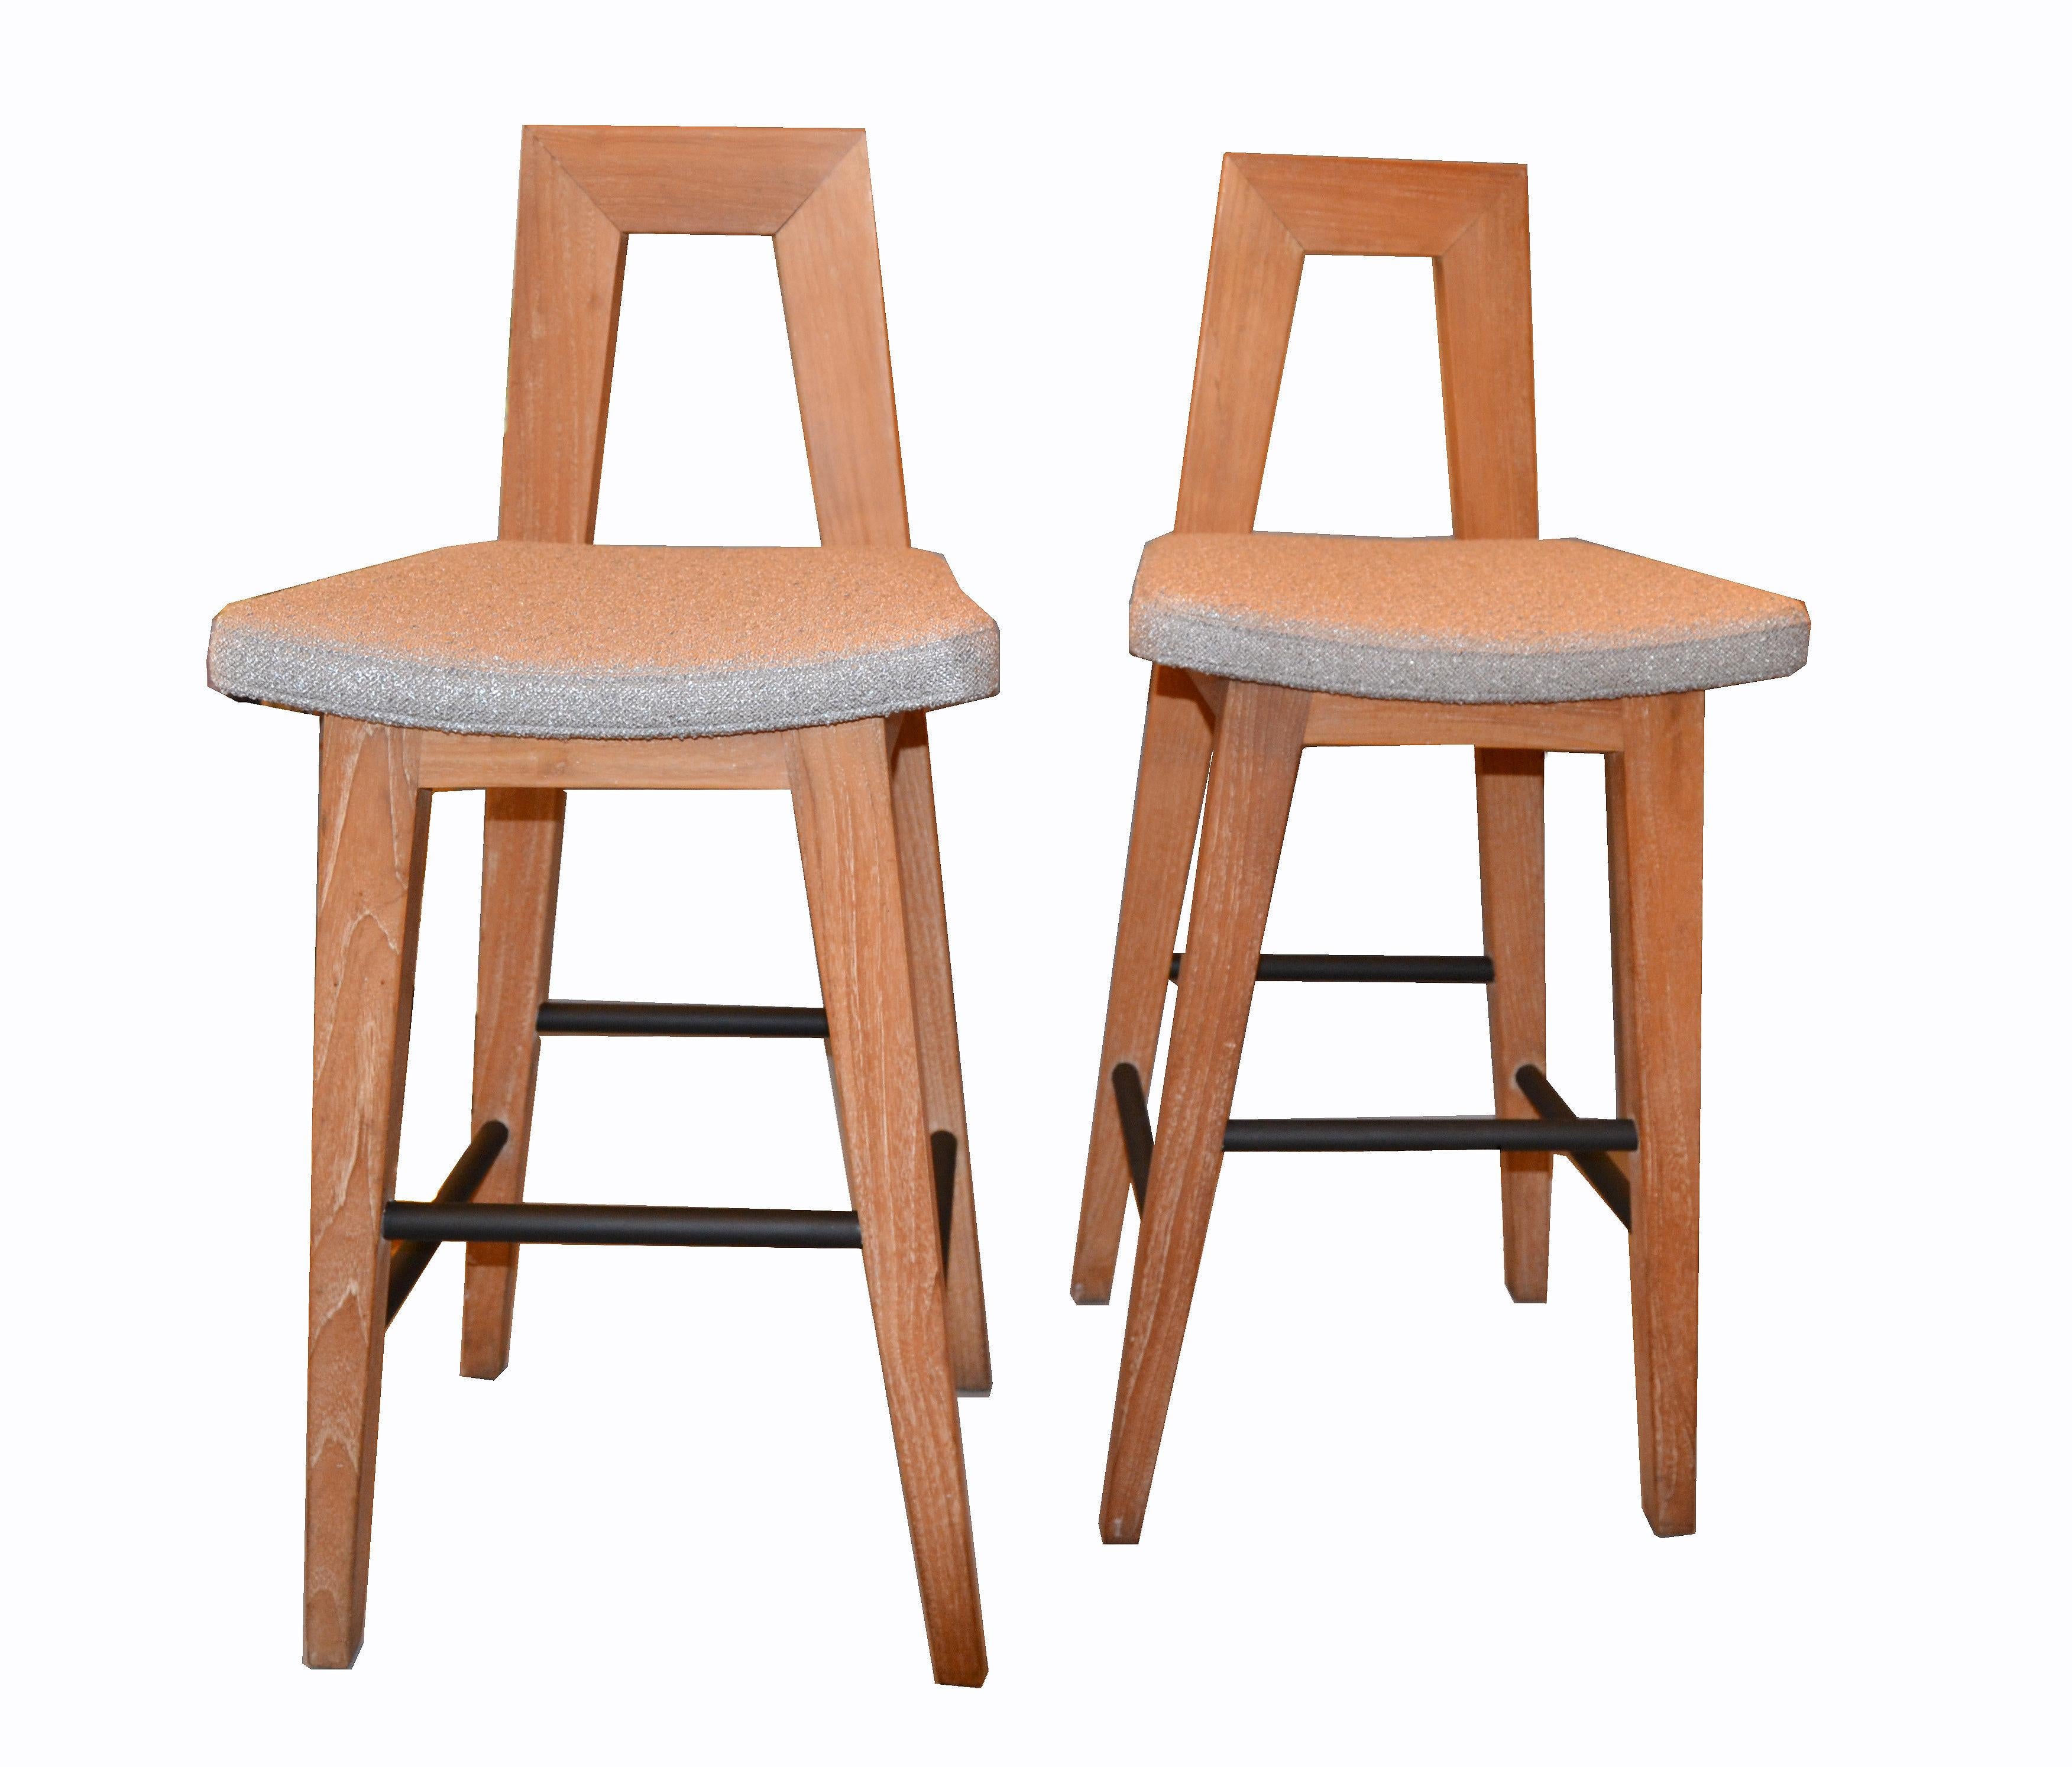 Pair of American white oak and fabric Mid-Century Modern counter height stools.
The seats have been newly upholstered.
The set is firm and sturdy and very comfortable to sit on.